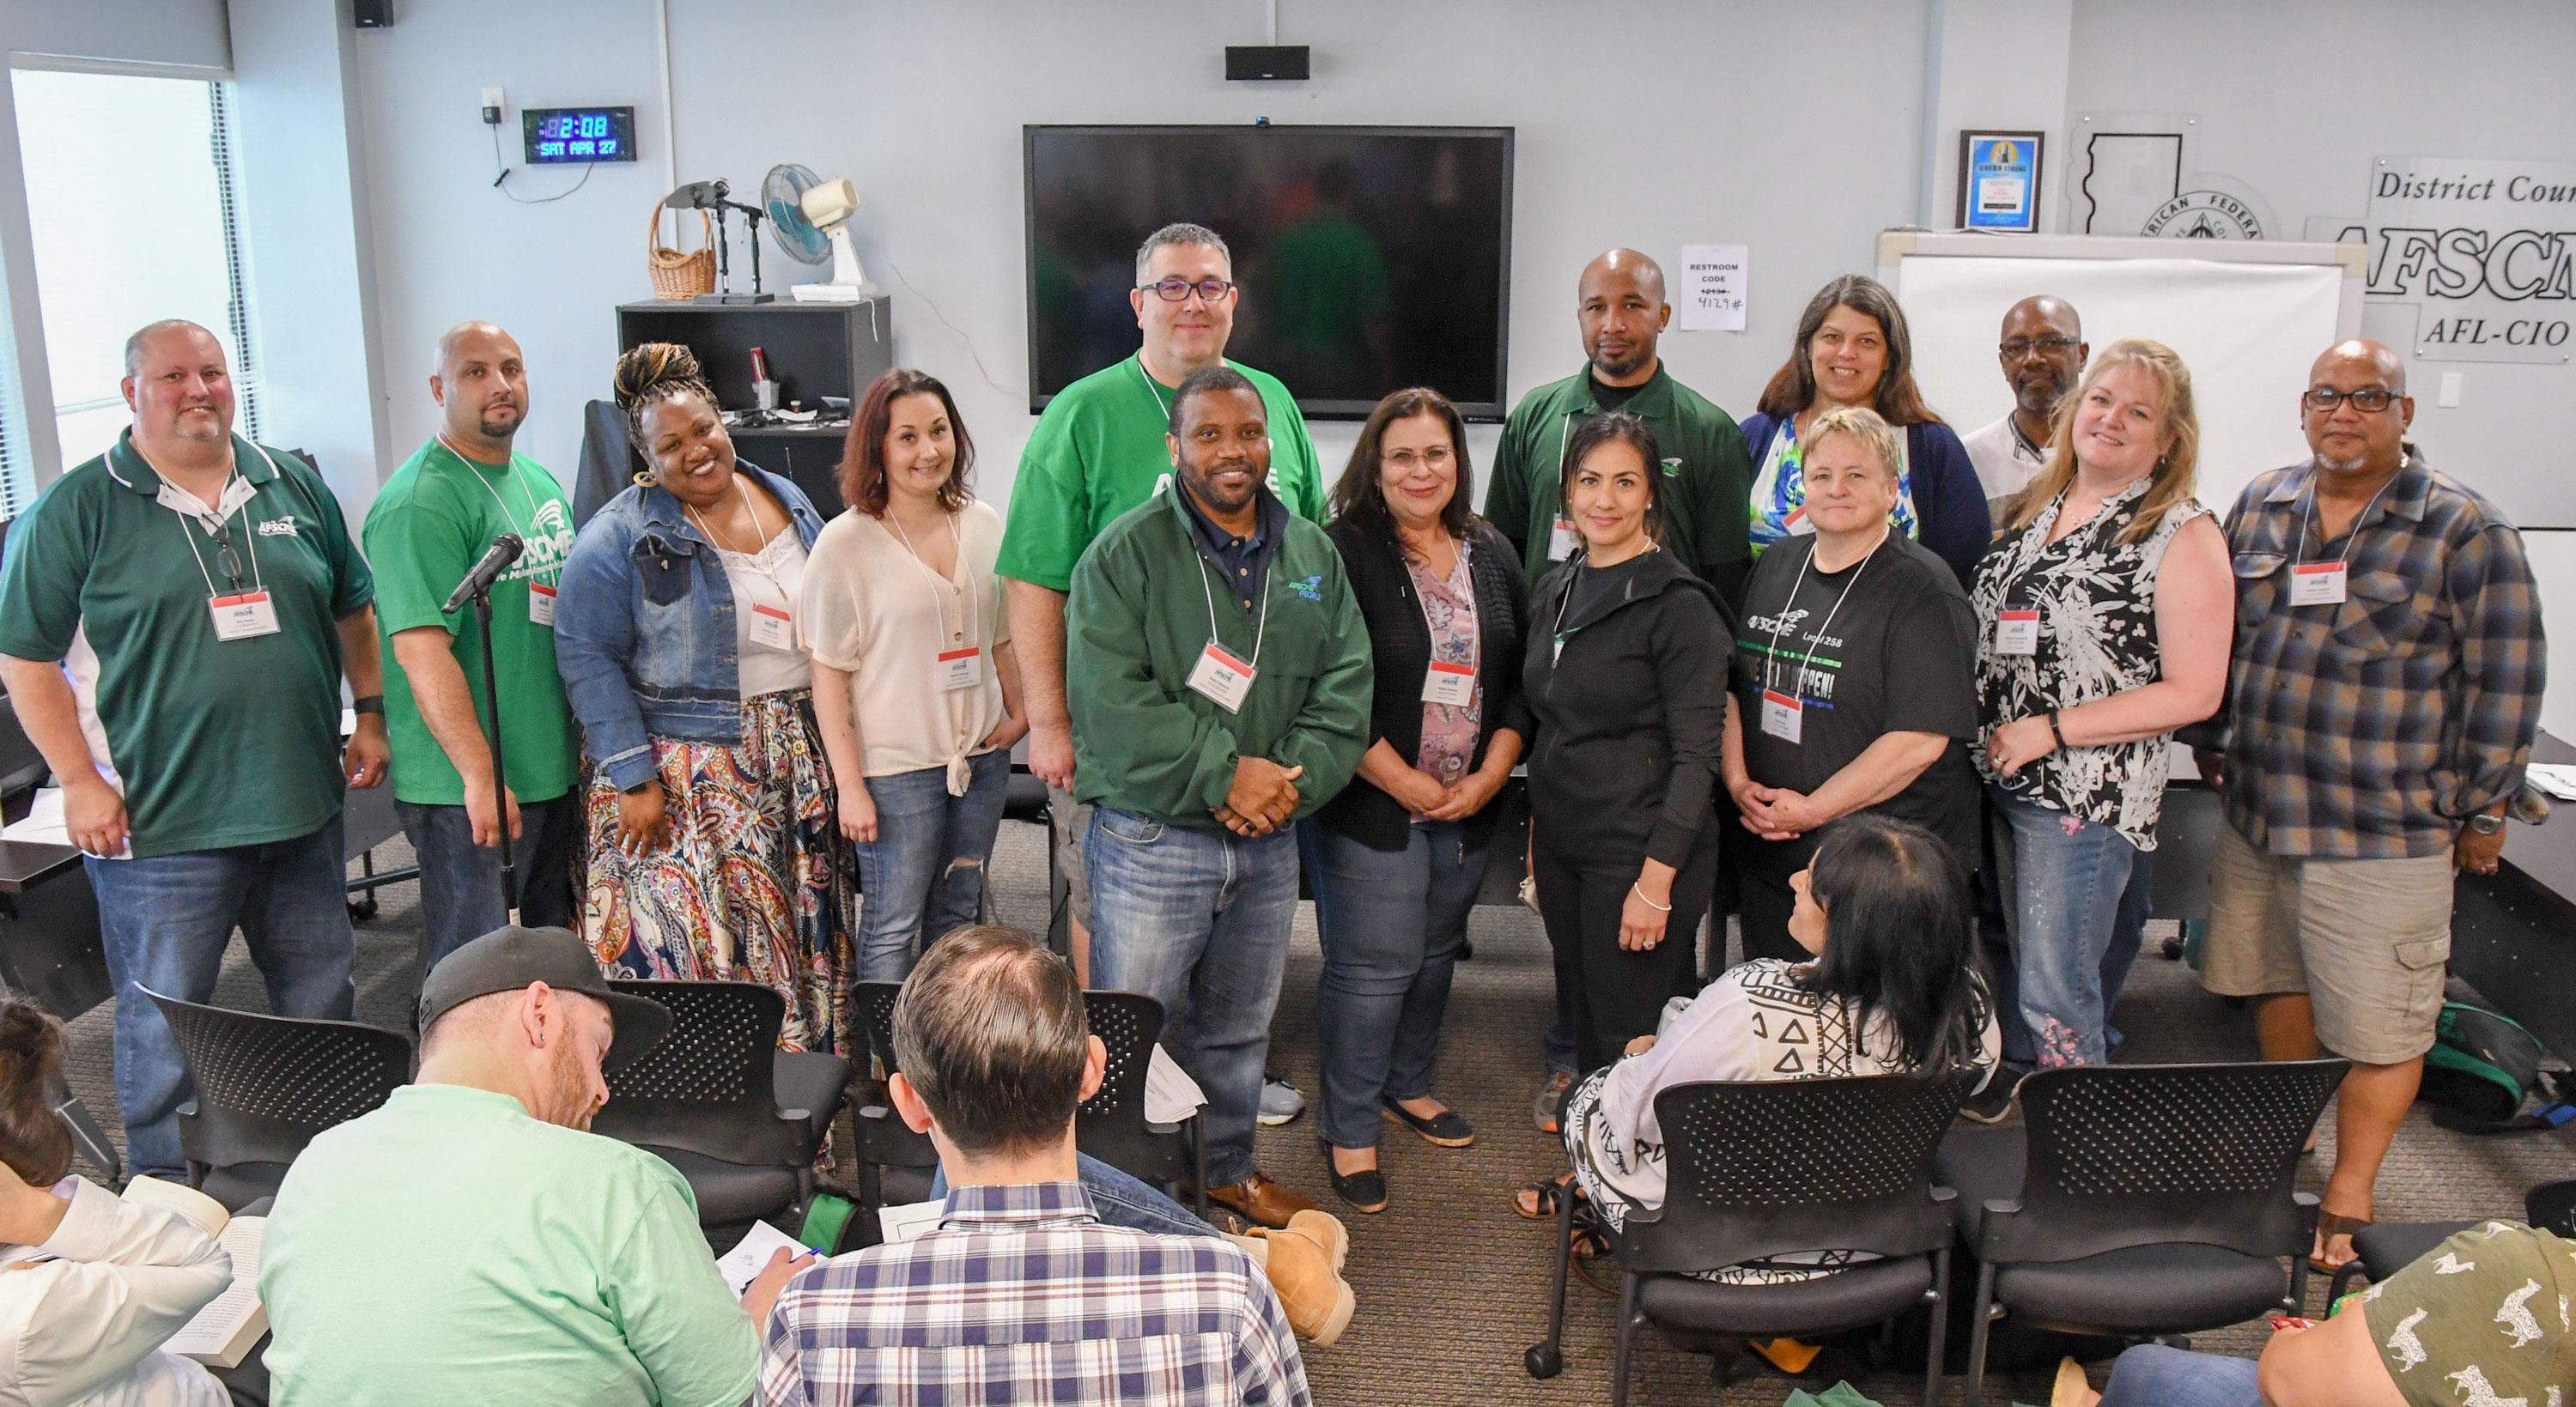 New AFSCME Council 57 Executive Board